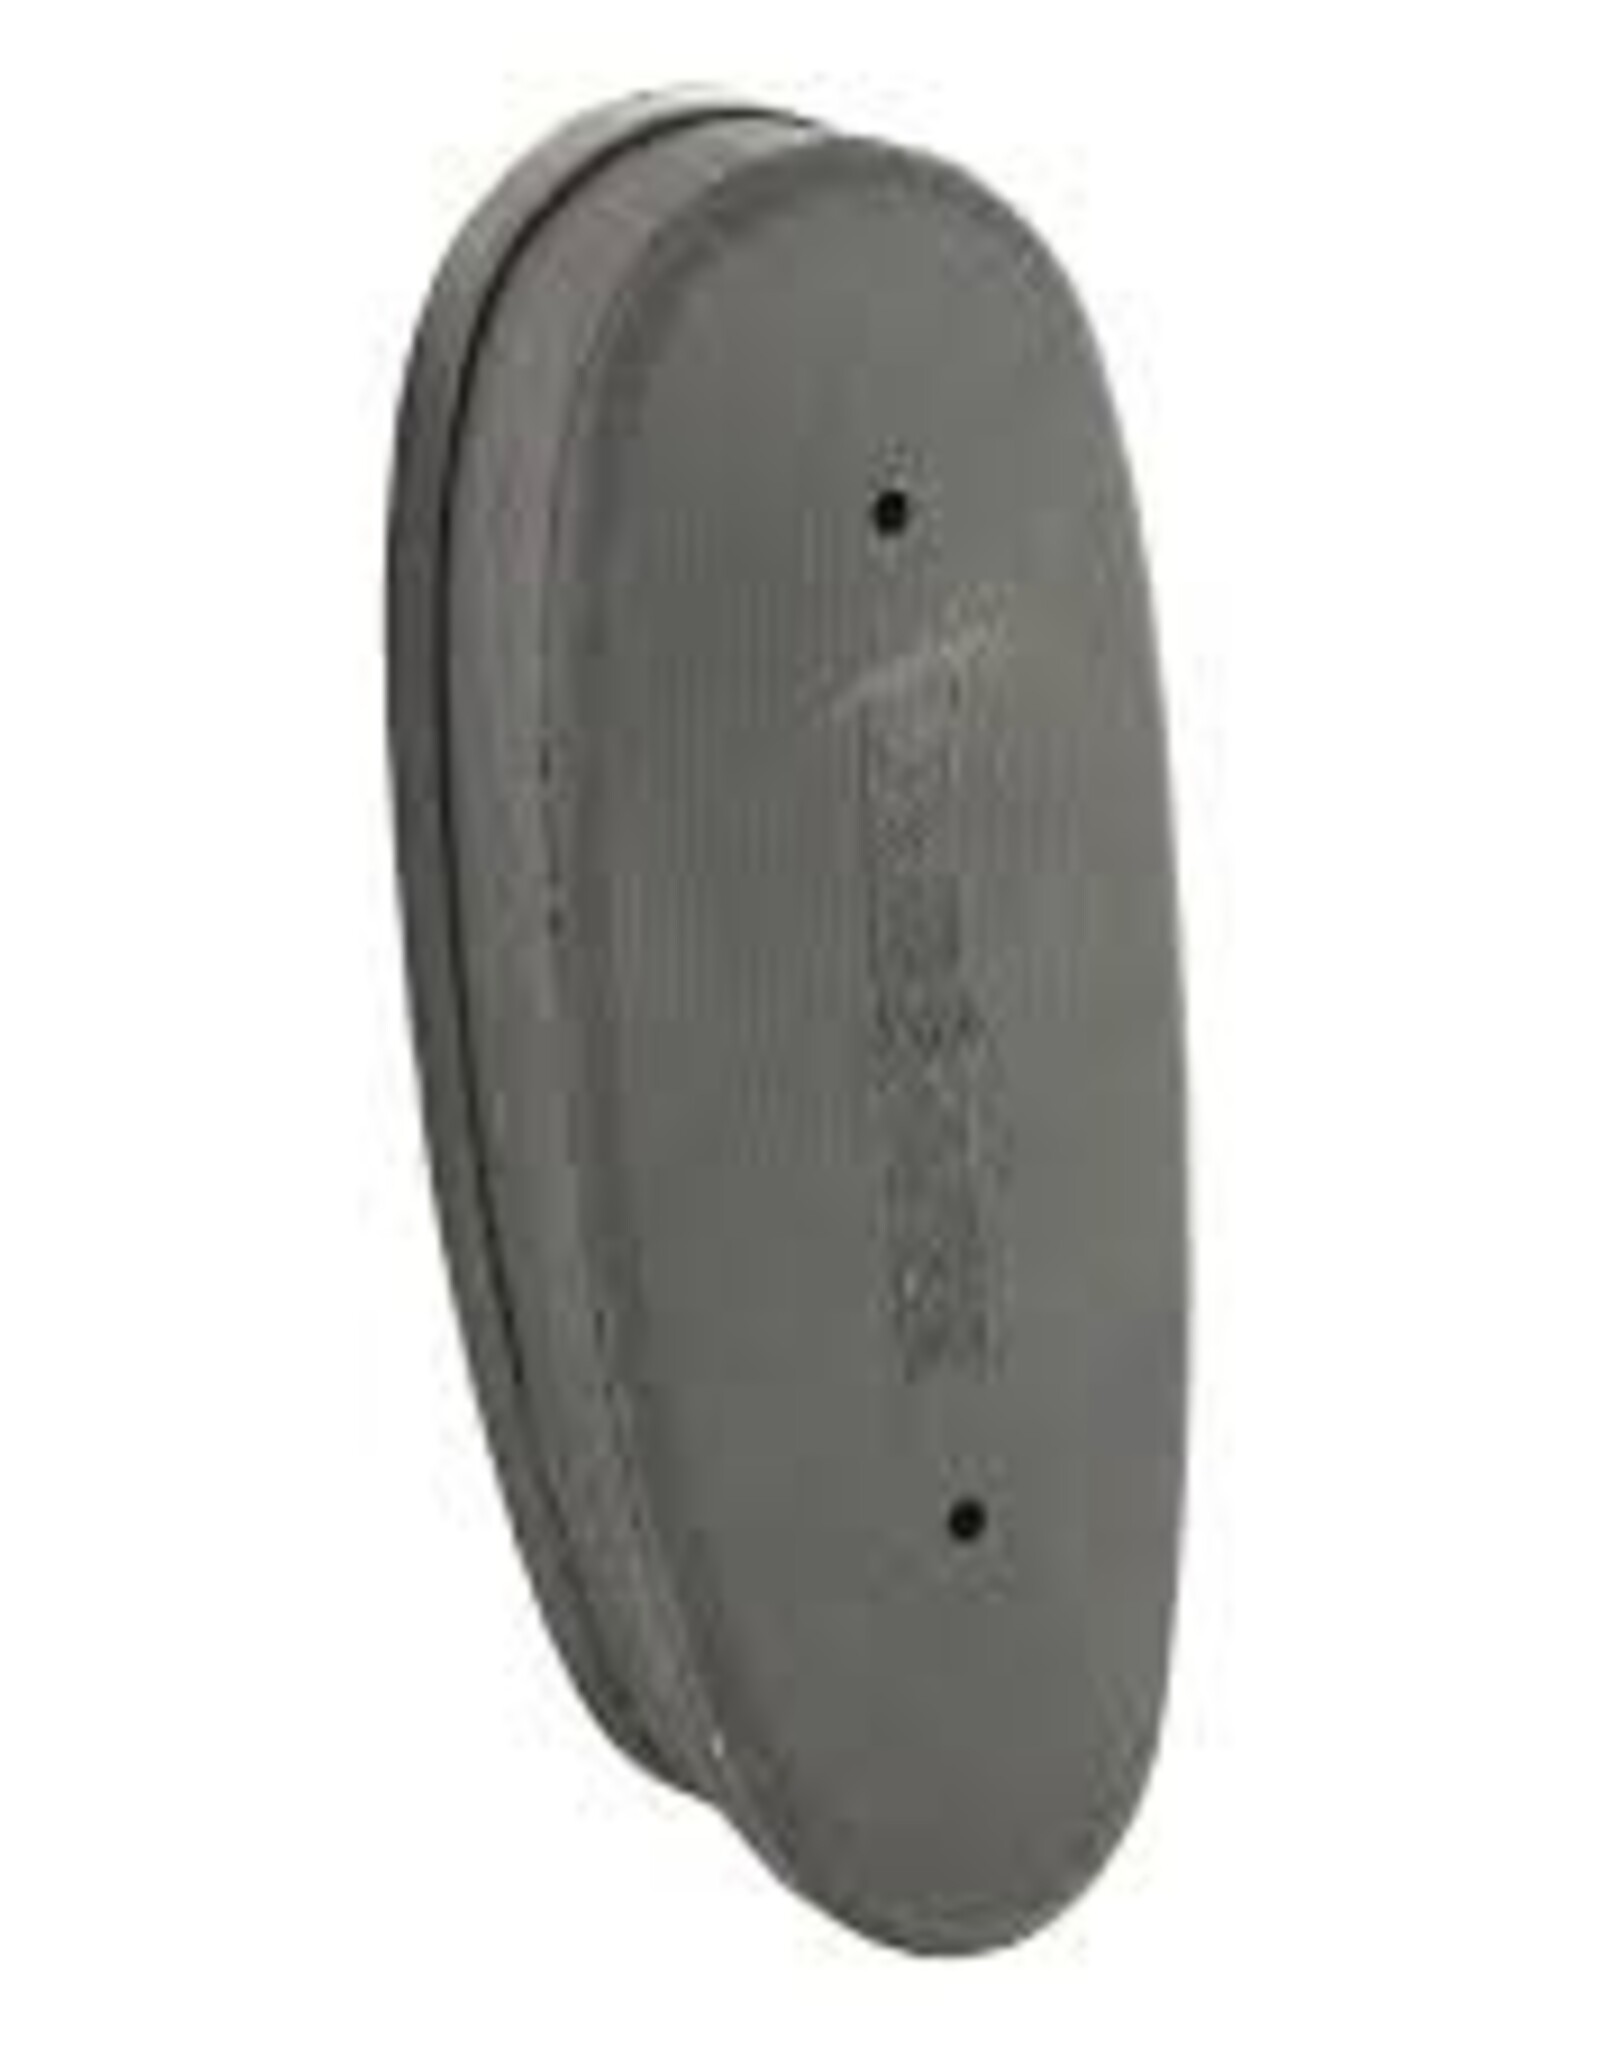 Limbsaver Limbsaver Recoil Pad Grind to fit small